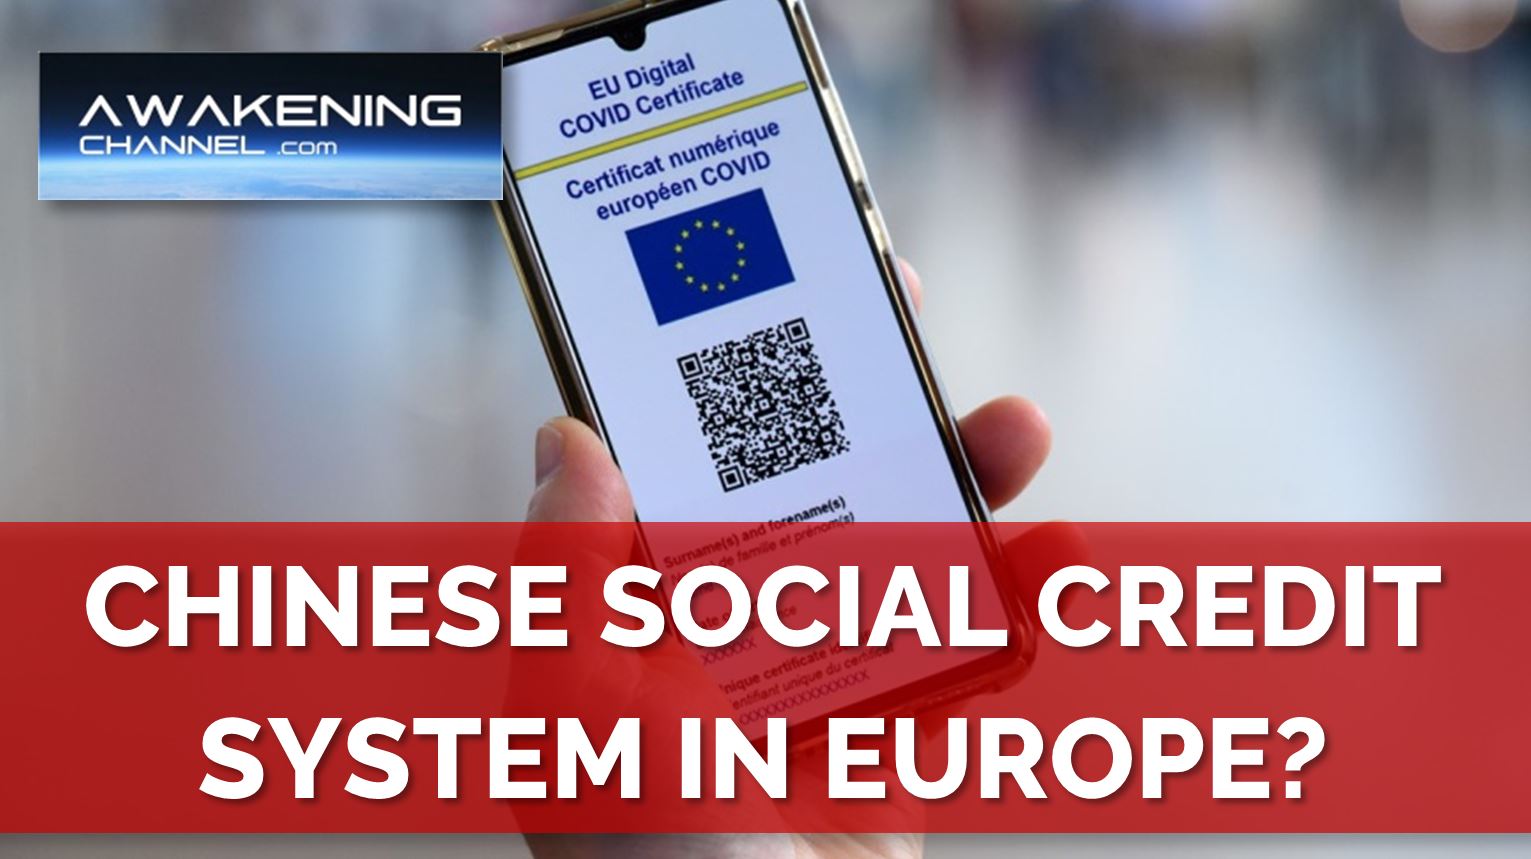 WARNING! Chinese Social Credit System in Europe